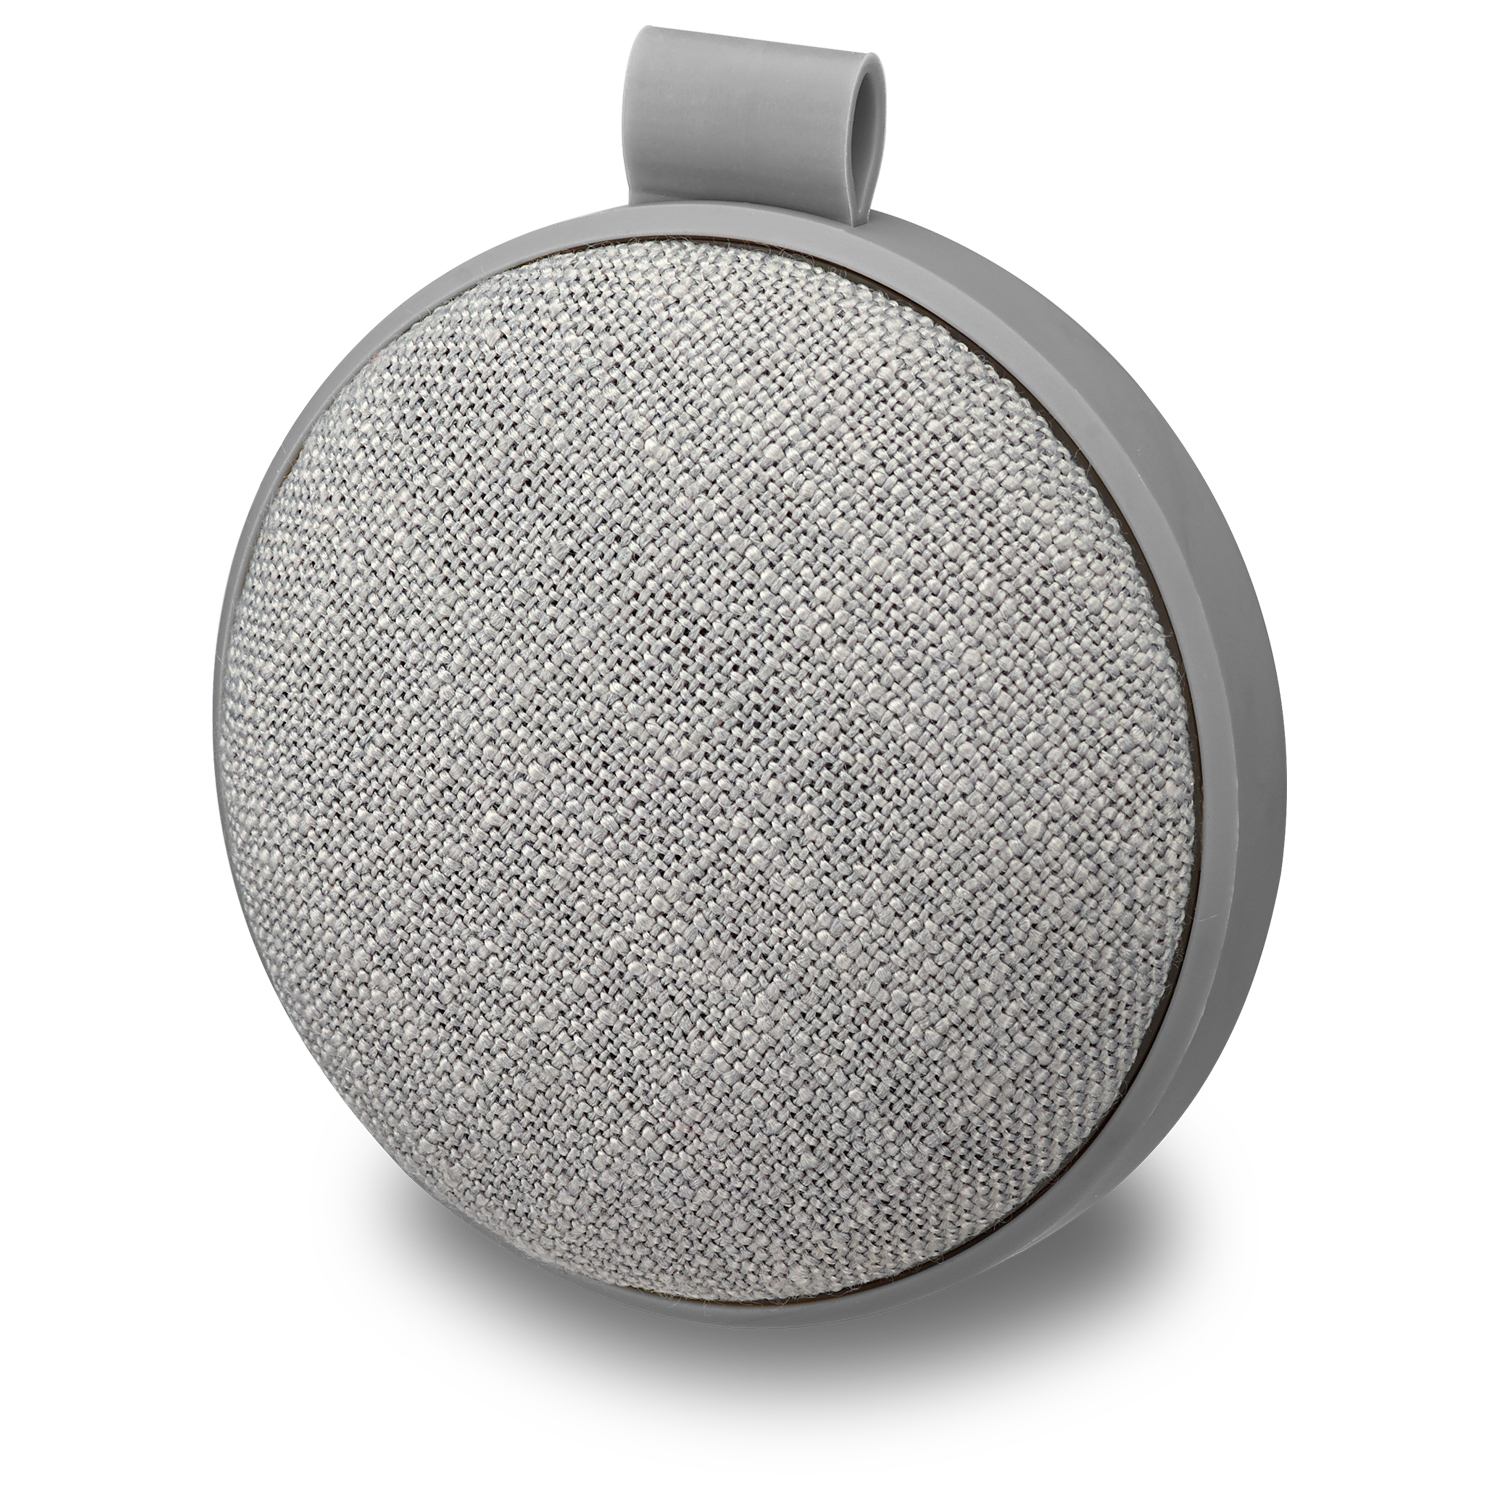 iLive Water Resistant Wireless Fabric Speaker, ISBW8, Multiple Colors - image 4 of 4